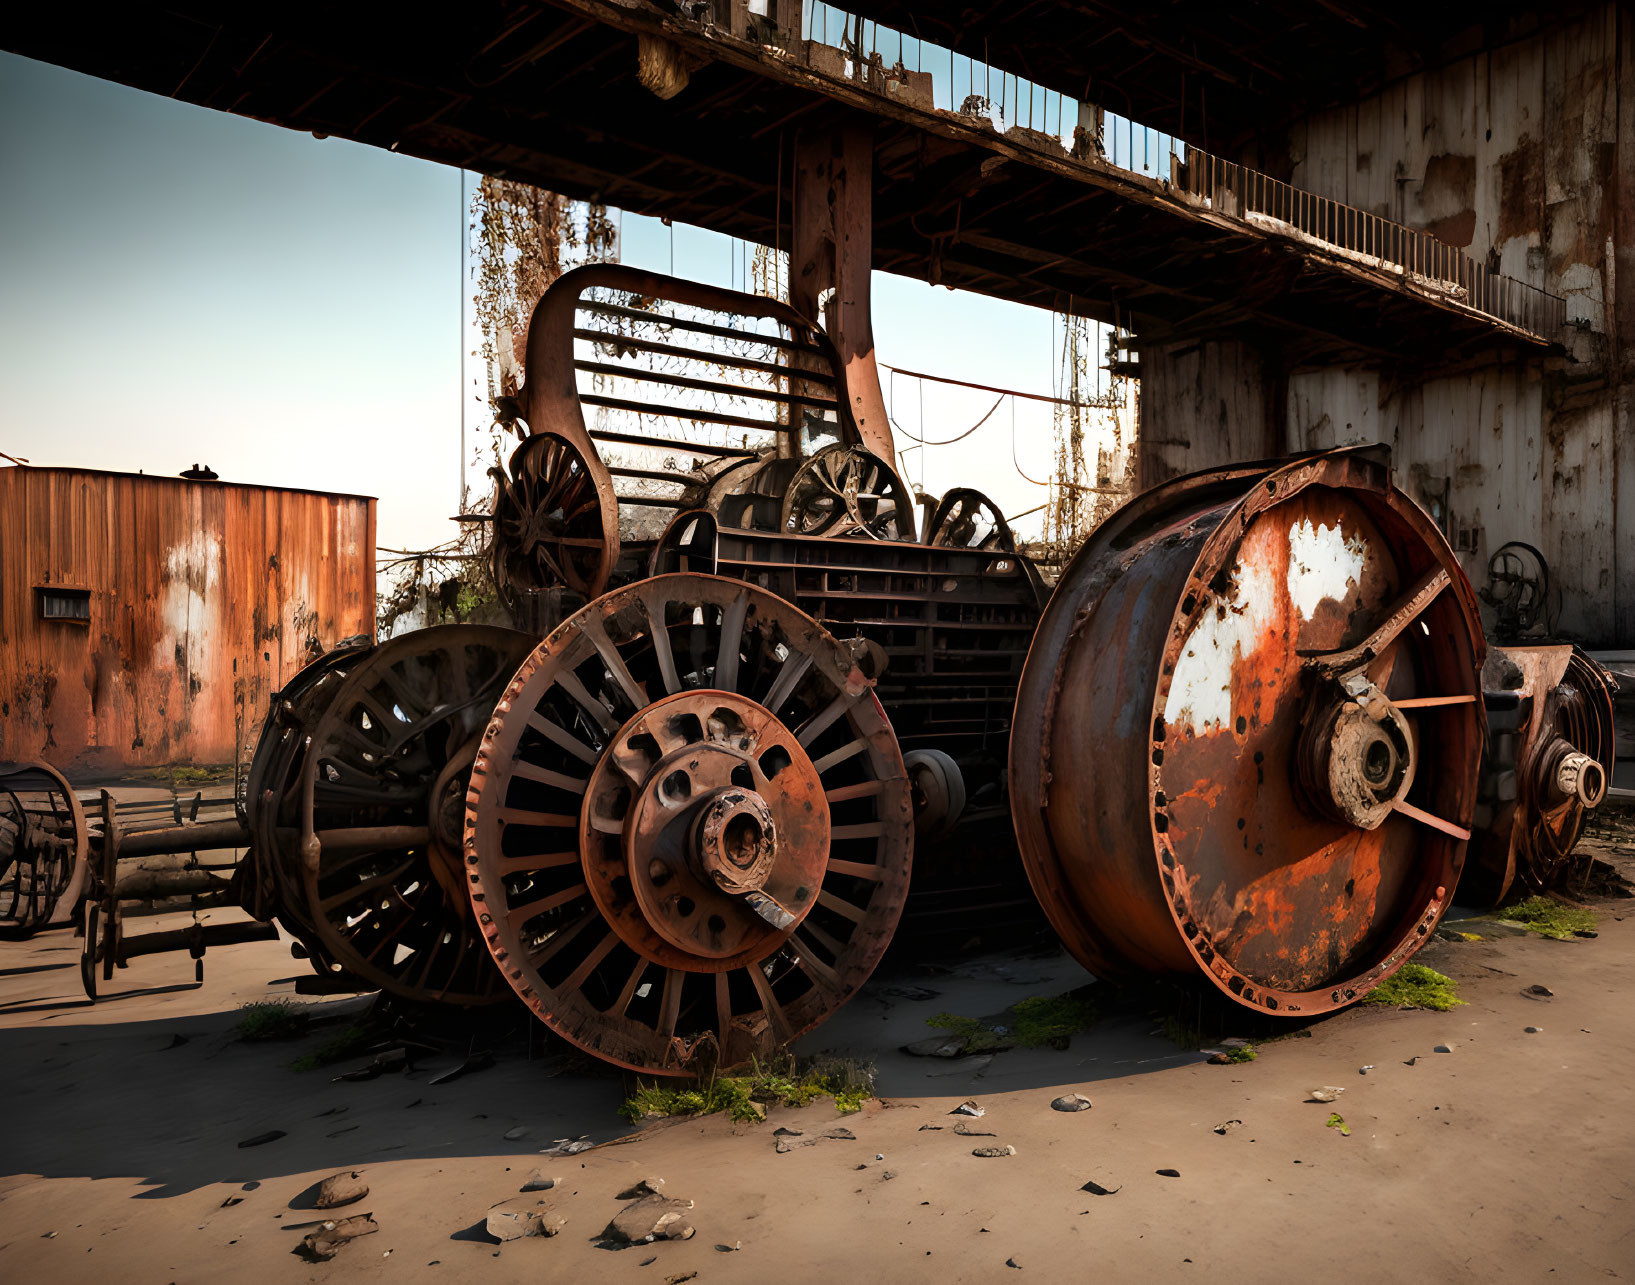 Old and rusted machinery